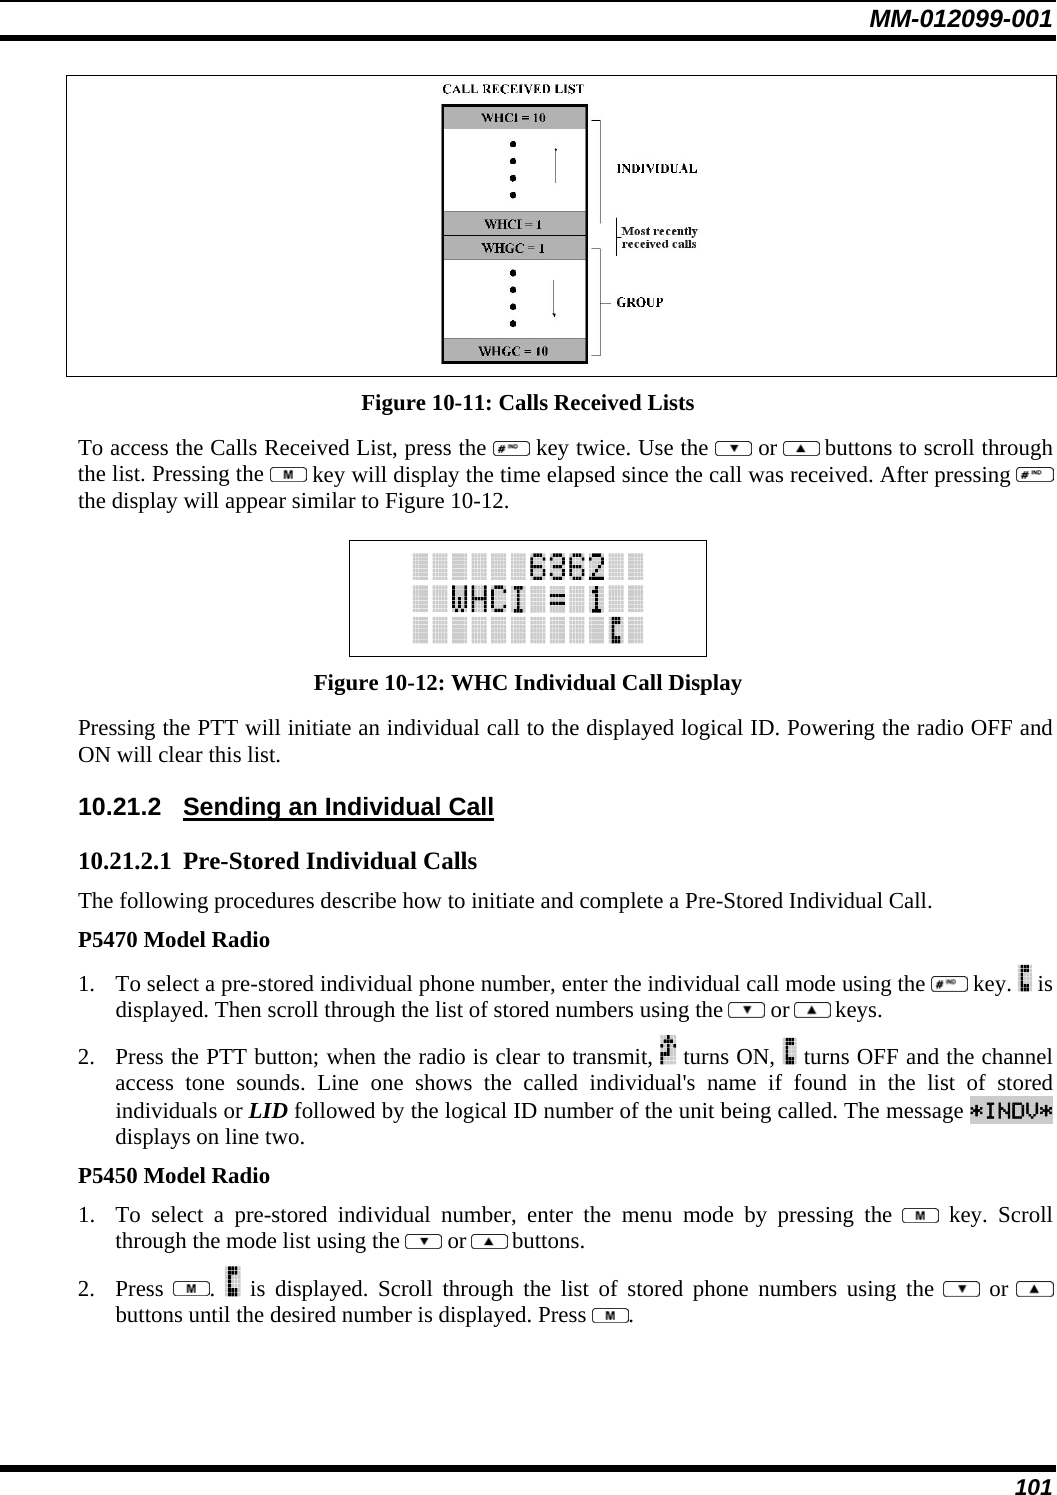 MM-012099-001 101  Figure 10-11: Calls Received Lists To access the Calls Received List, press the   key twice. Use the   or  buttons to scroll through the list. Pressing the   key will display the time elapsed since the call was received. After pressing   the display will appear similar to Figure 10-12.   Figure 10-12: WHC Individual Call Display Pressing the PTT will initiate an individual call to the displayed logical ID. Powering the radio OFF and ON will clear this list. 10.21.2  Sending an Individual Call 10.21.2.1 Pre-Stored Individual Calls The following procedures describe how to initiate and complete a Pre-Stored Individual Call. P5470 Model Radio 1. To select a pre-stored individual phone number, enter the individual call mode using the   key.   is displayed. Then scroll through the list of stored numbers using the   or  keys.  2. Press the PTT button; when the radio is clear to transmit,   turns ON,   turns OFF and the channel access tone sounds. Line one shows the called individual&apos;s name if found in the list of stored individuals or LID followed by the logical ID number of the unit being called. The message *INDV* displays on line two. P5450 Model Radio 1. To select a pre-stored individual number, enter the menu mode by pressing the   key. Scroll through the mode list using the   or  buttons.  2. Press  .   is displayed. Scroll through the list of stored phone numbers using the   or  buttons until the desired number is displayed. Press  . 